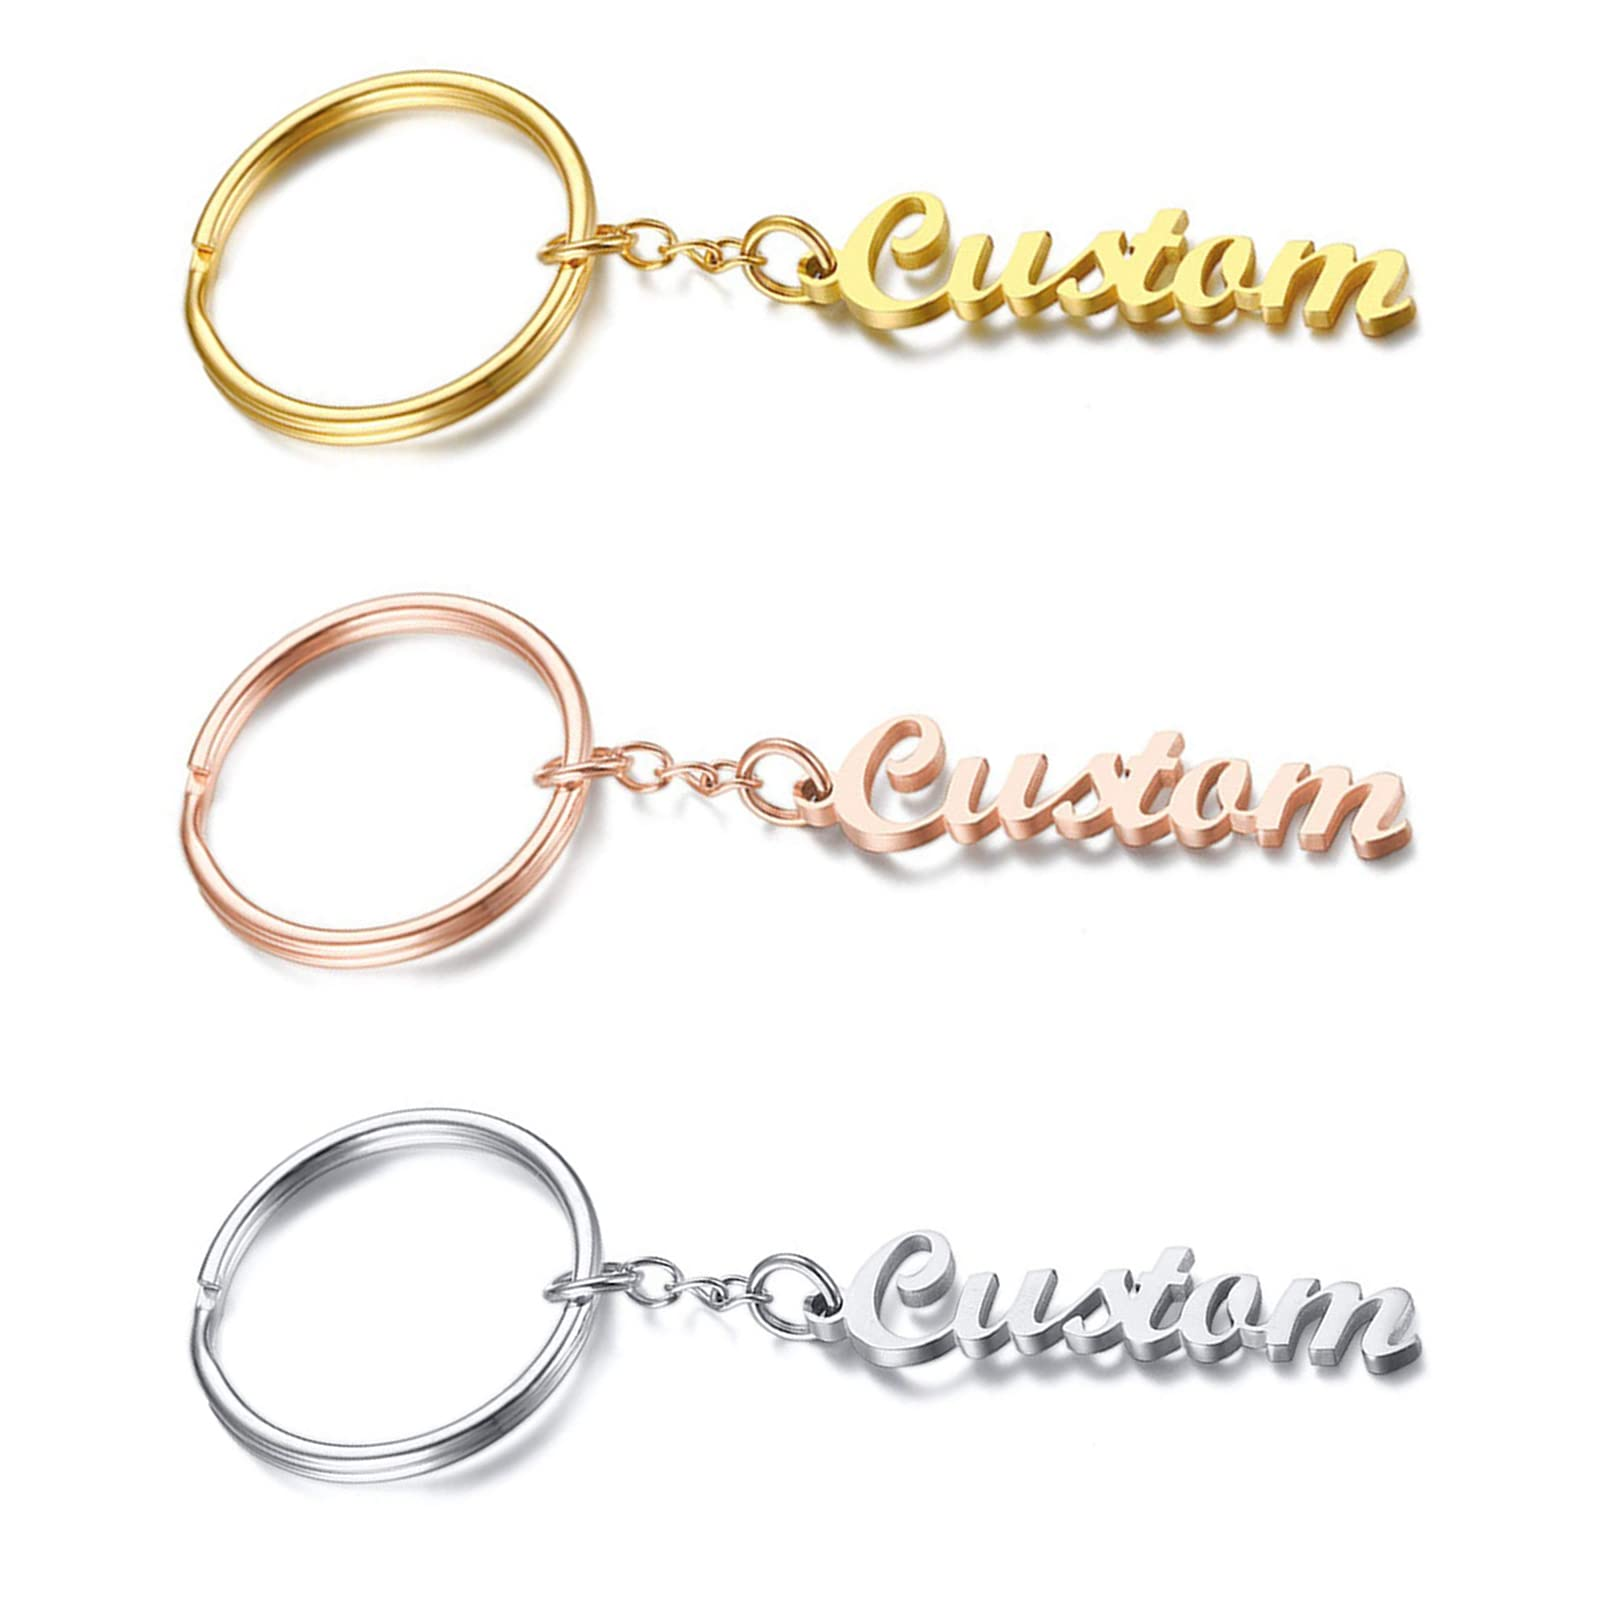 Engraved Letters Gold Plate Personalized Name Key Chain